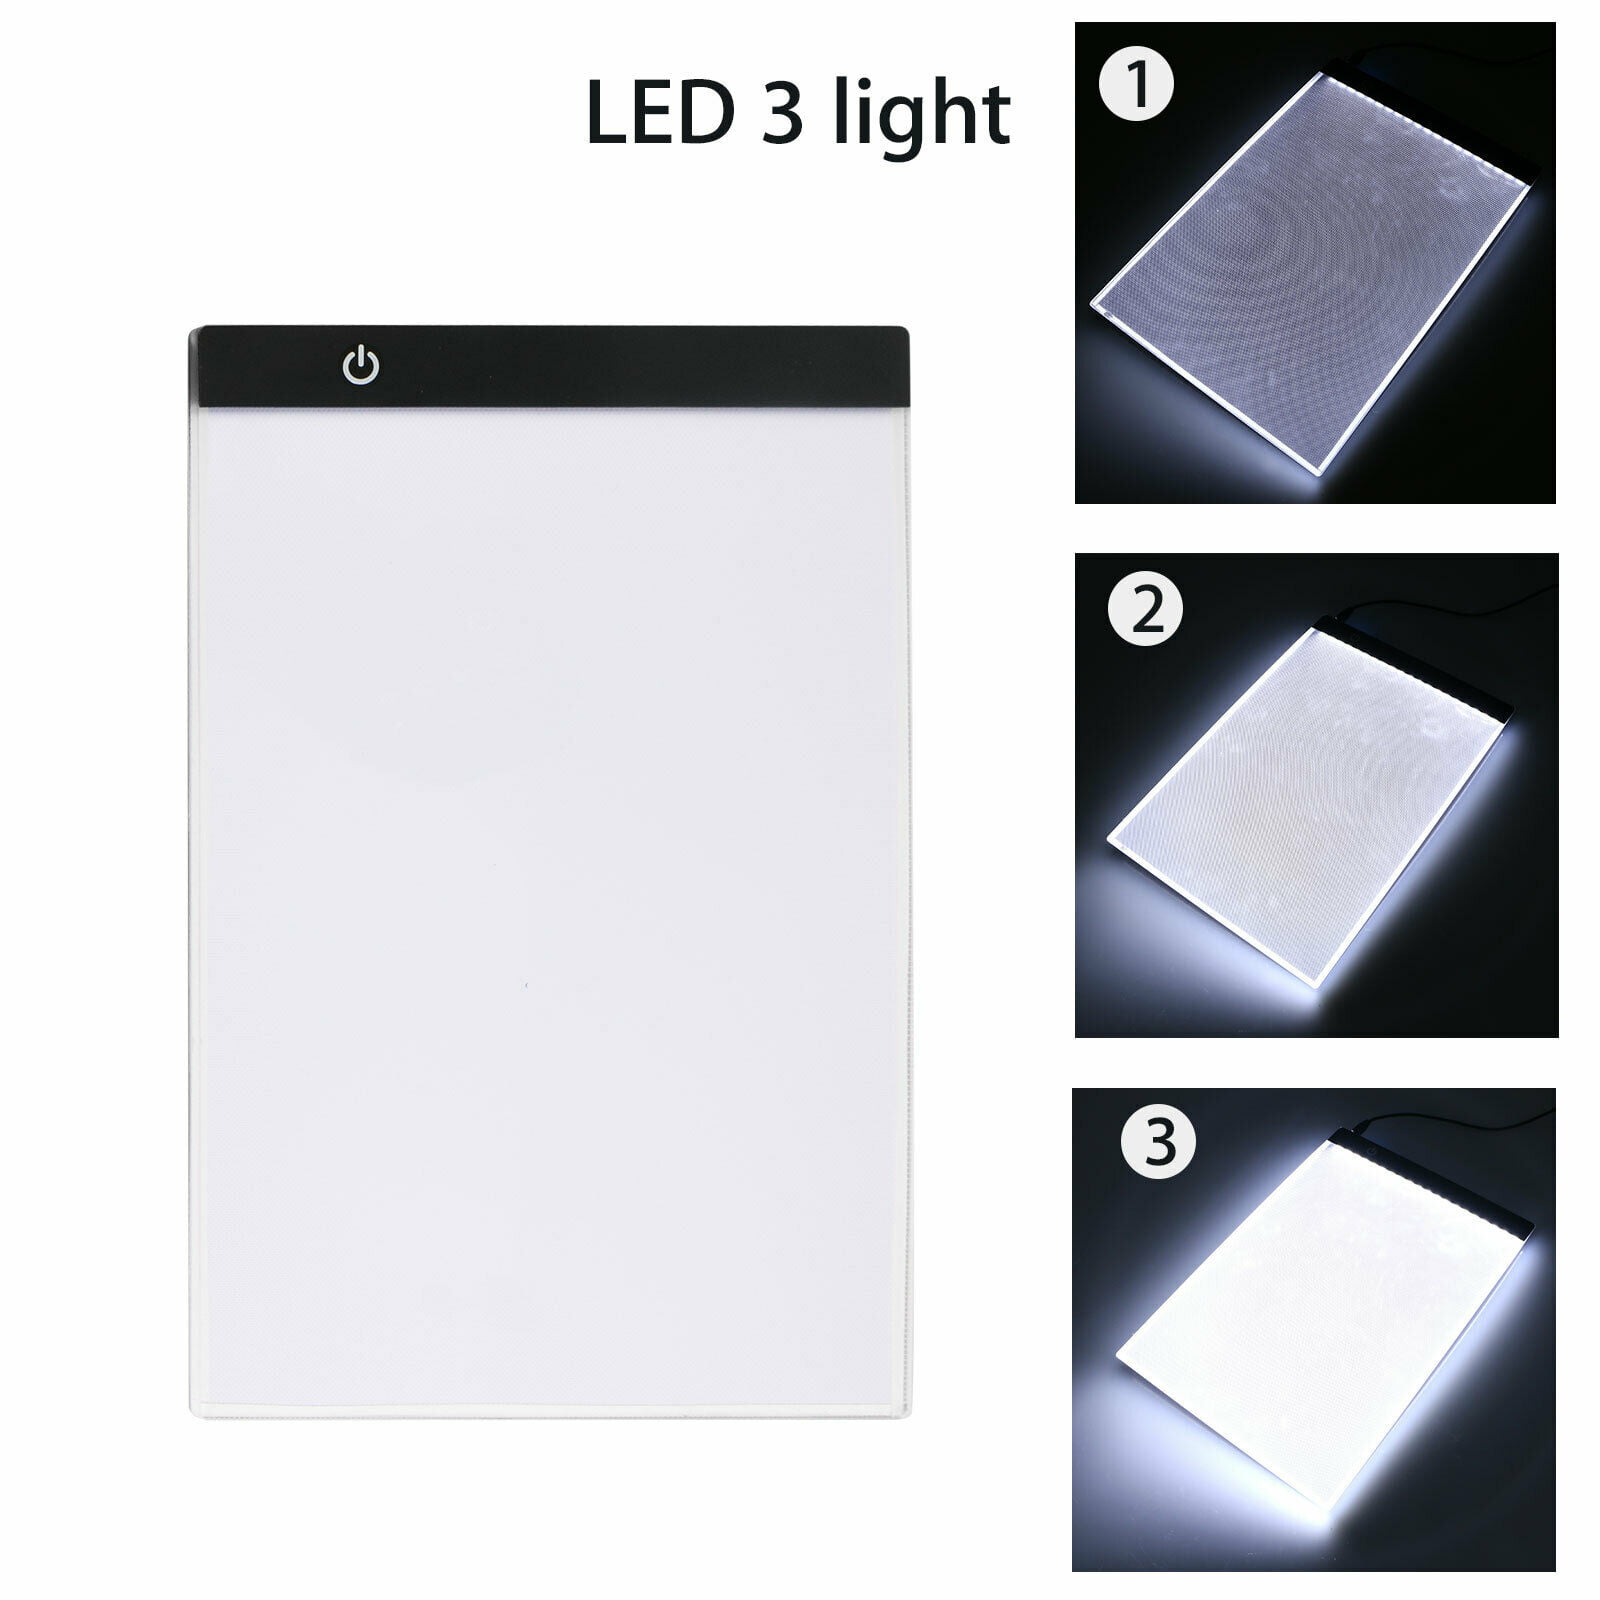 Walfront A4 LED Tracing Light Pad,Portable LED Artcraft Tracing Light Board Light Box Brightness Control with USB Power for Kids